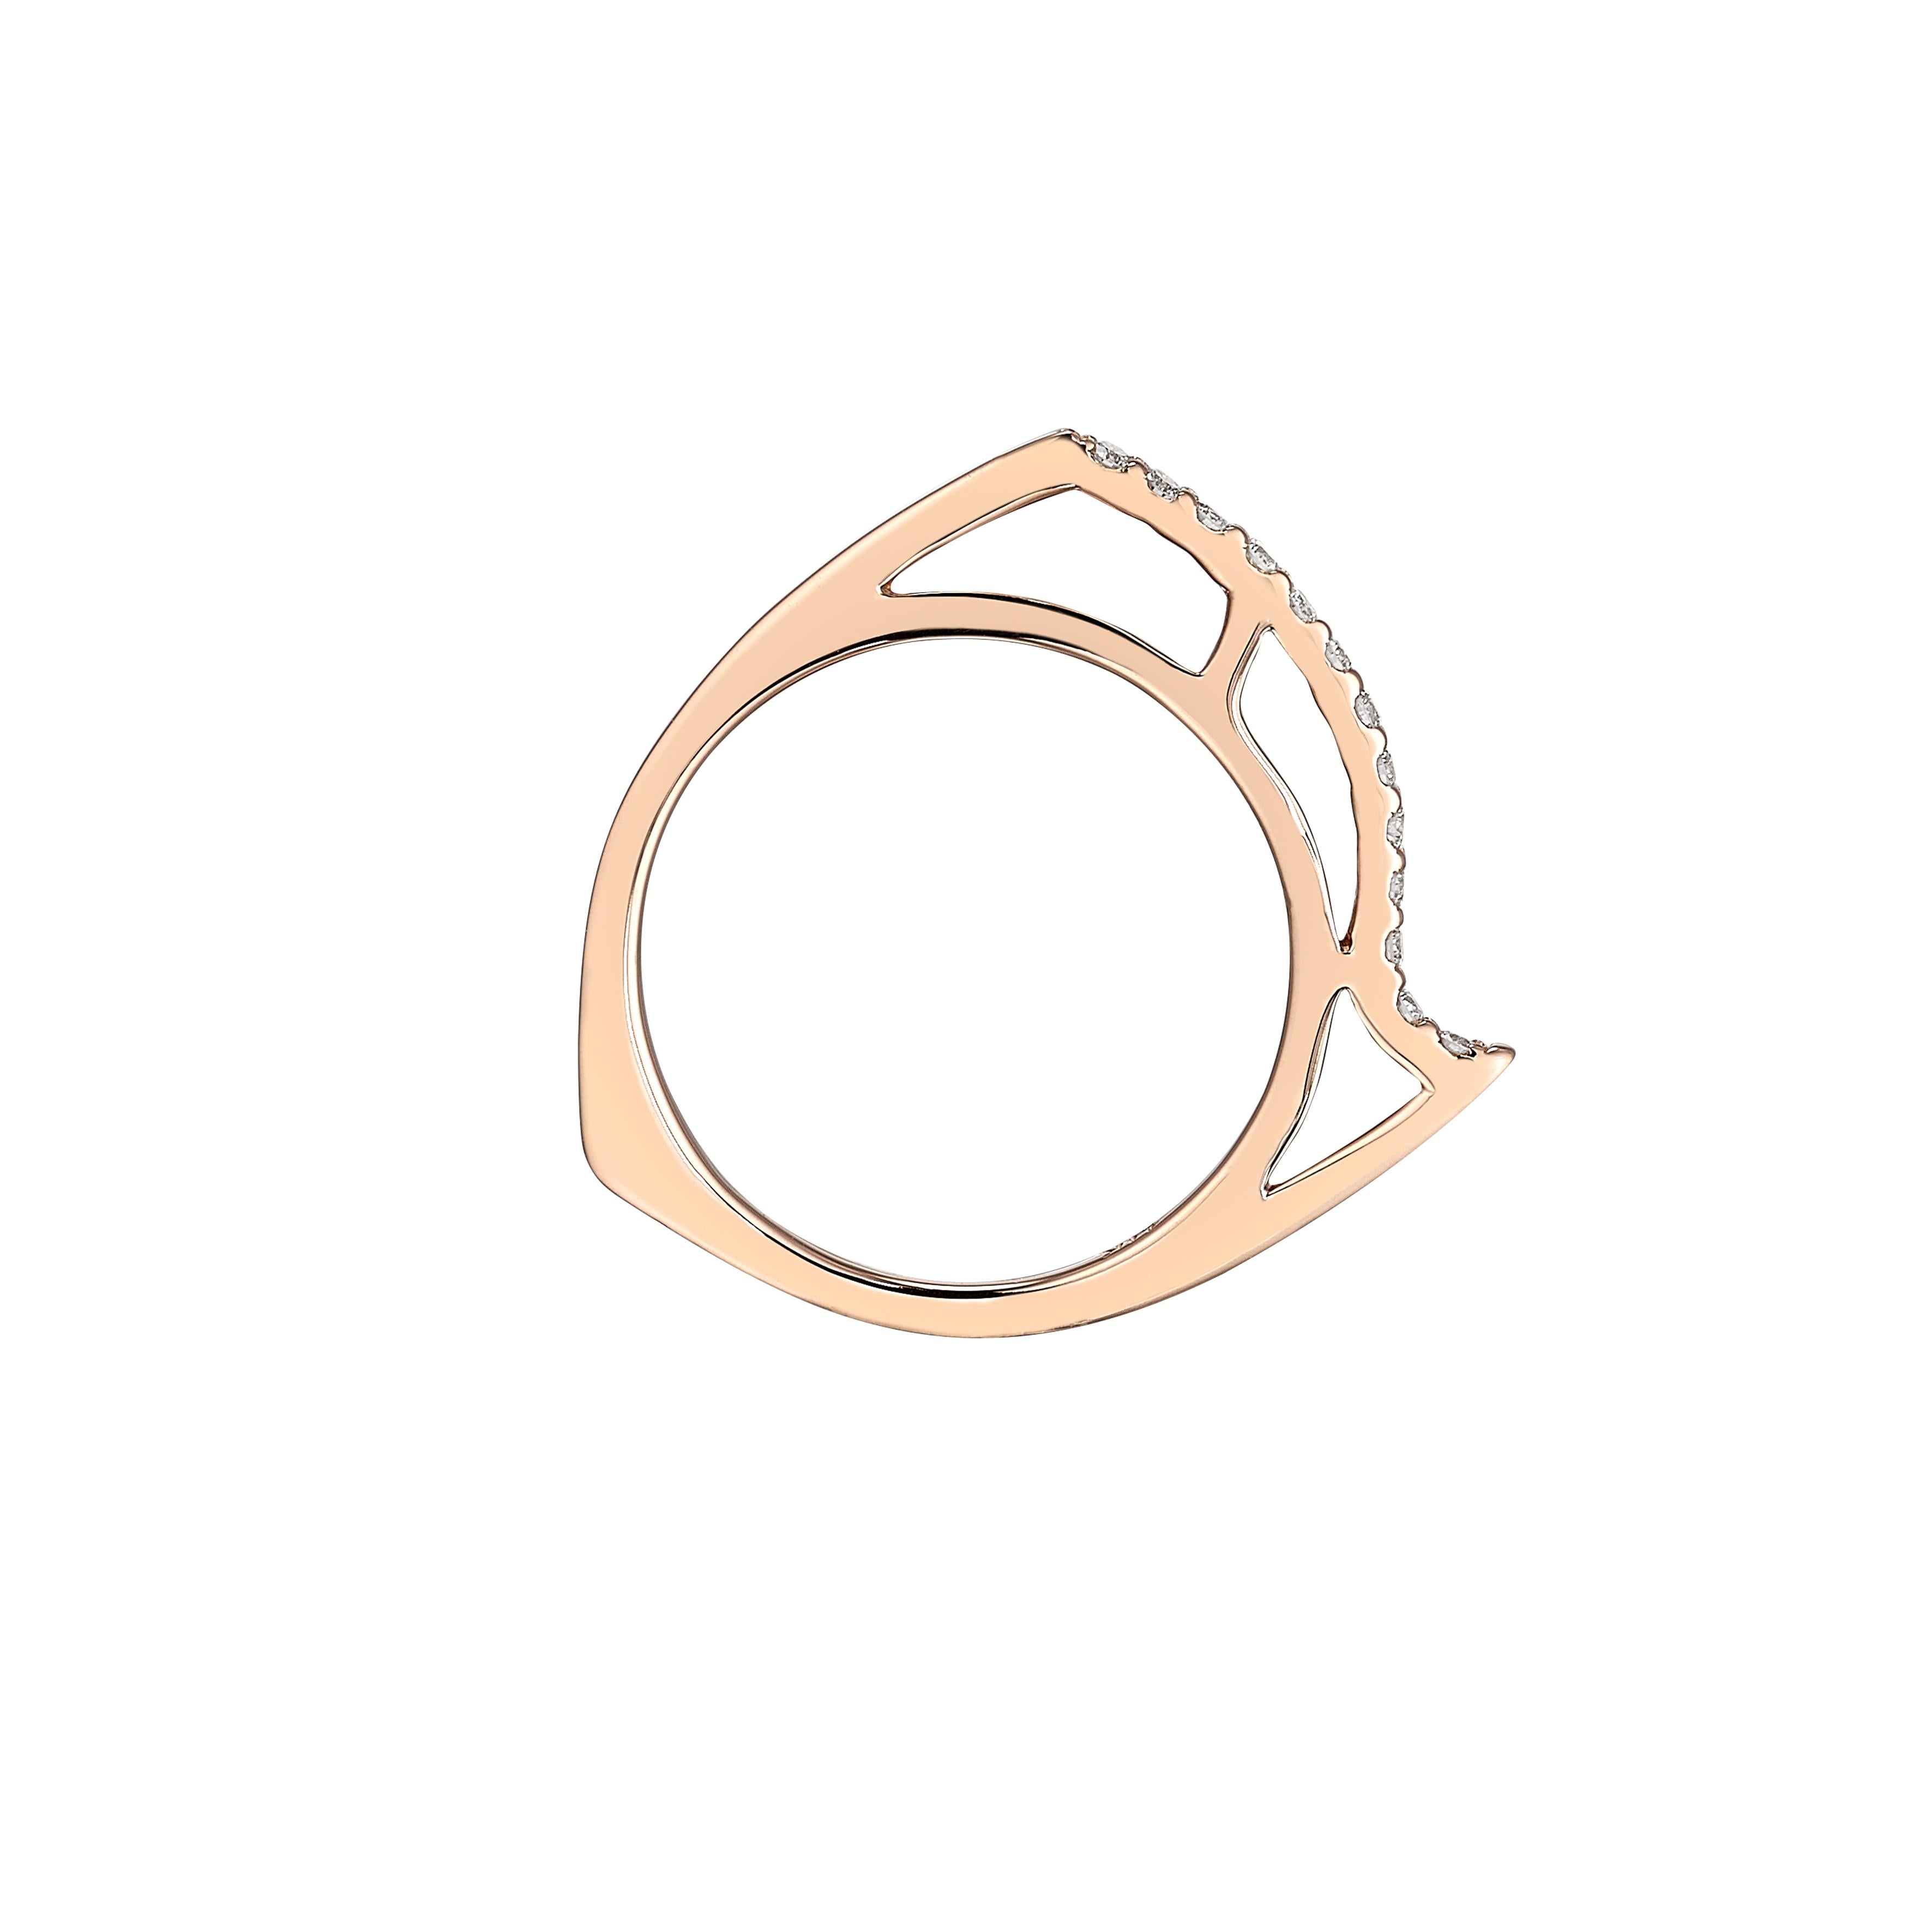 Contemporary Anabela Chan Fine Sustainable Jewelry Rose Gold Diamond Morpho Ring. 02 For Sale